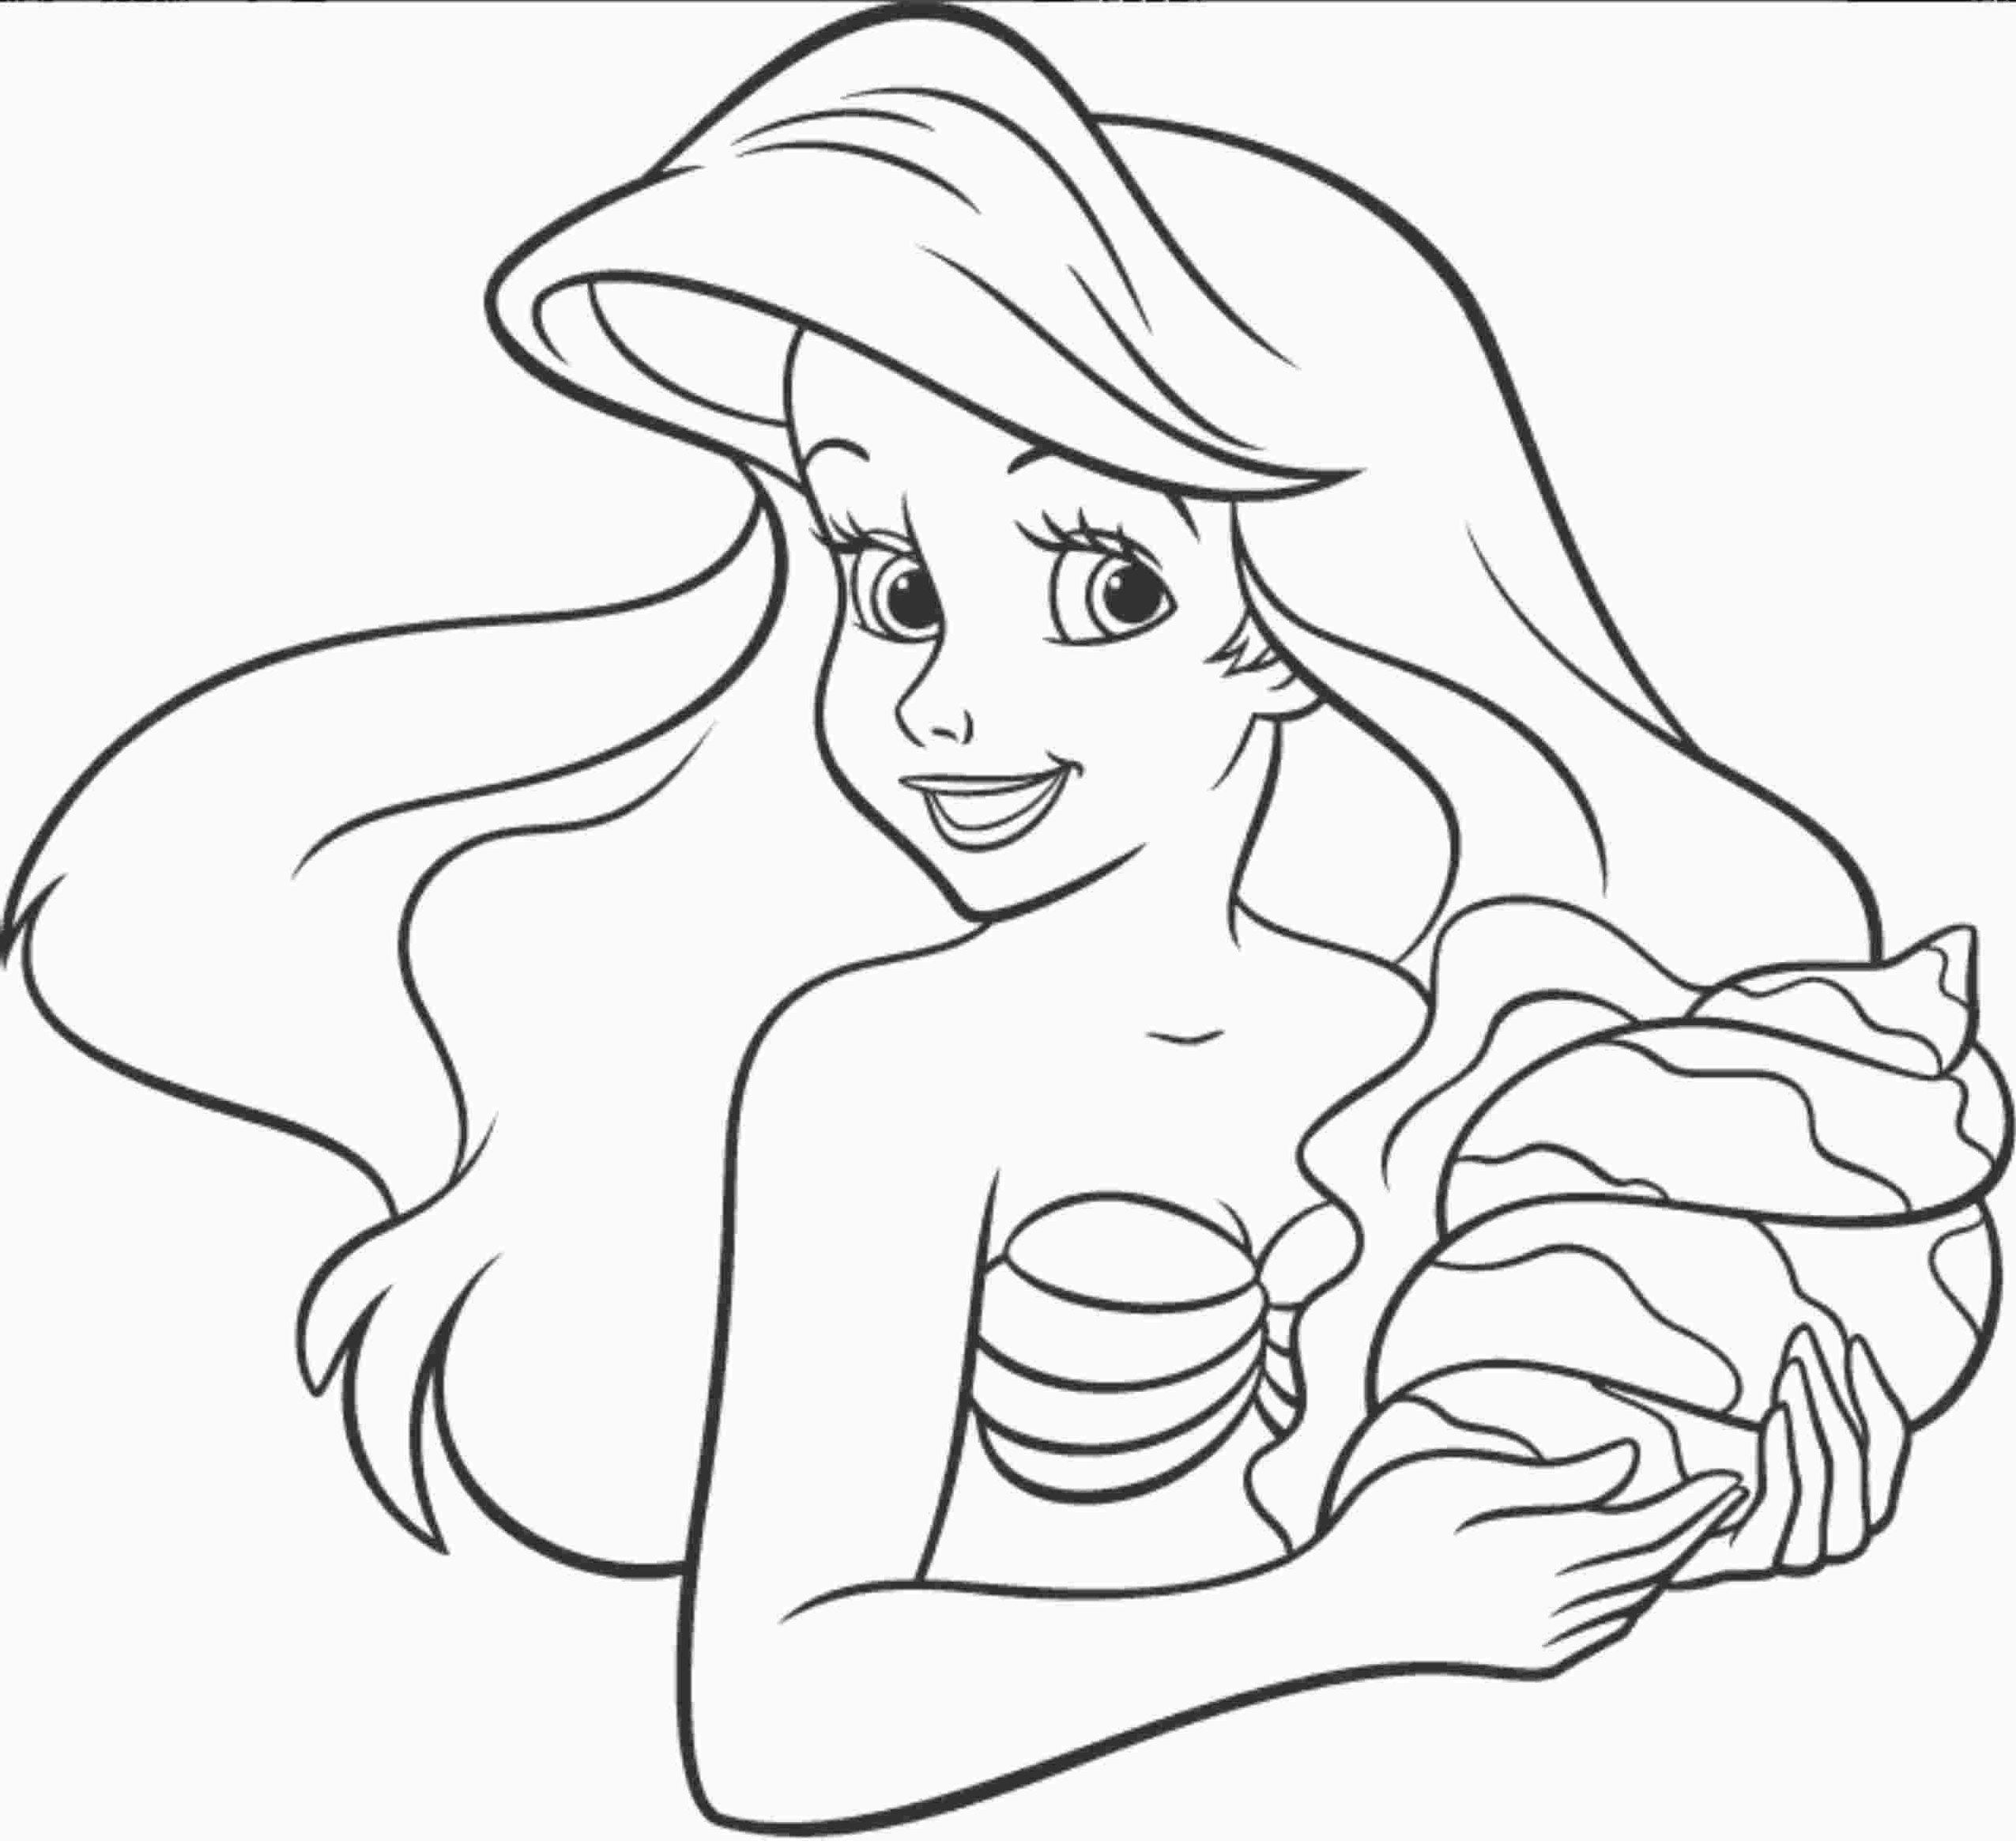 the-little-mermaid-coloring-page-0006-q1